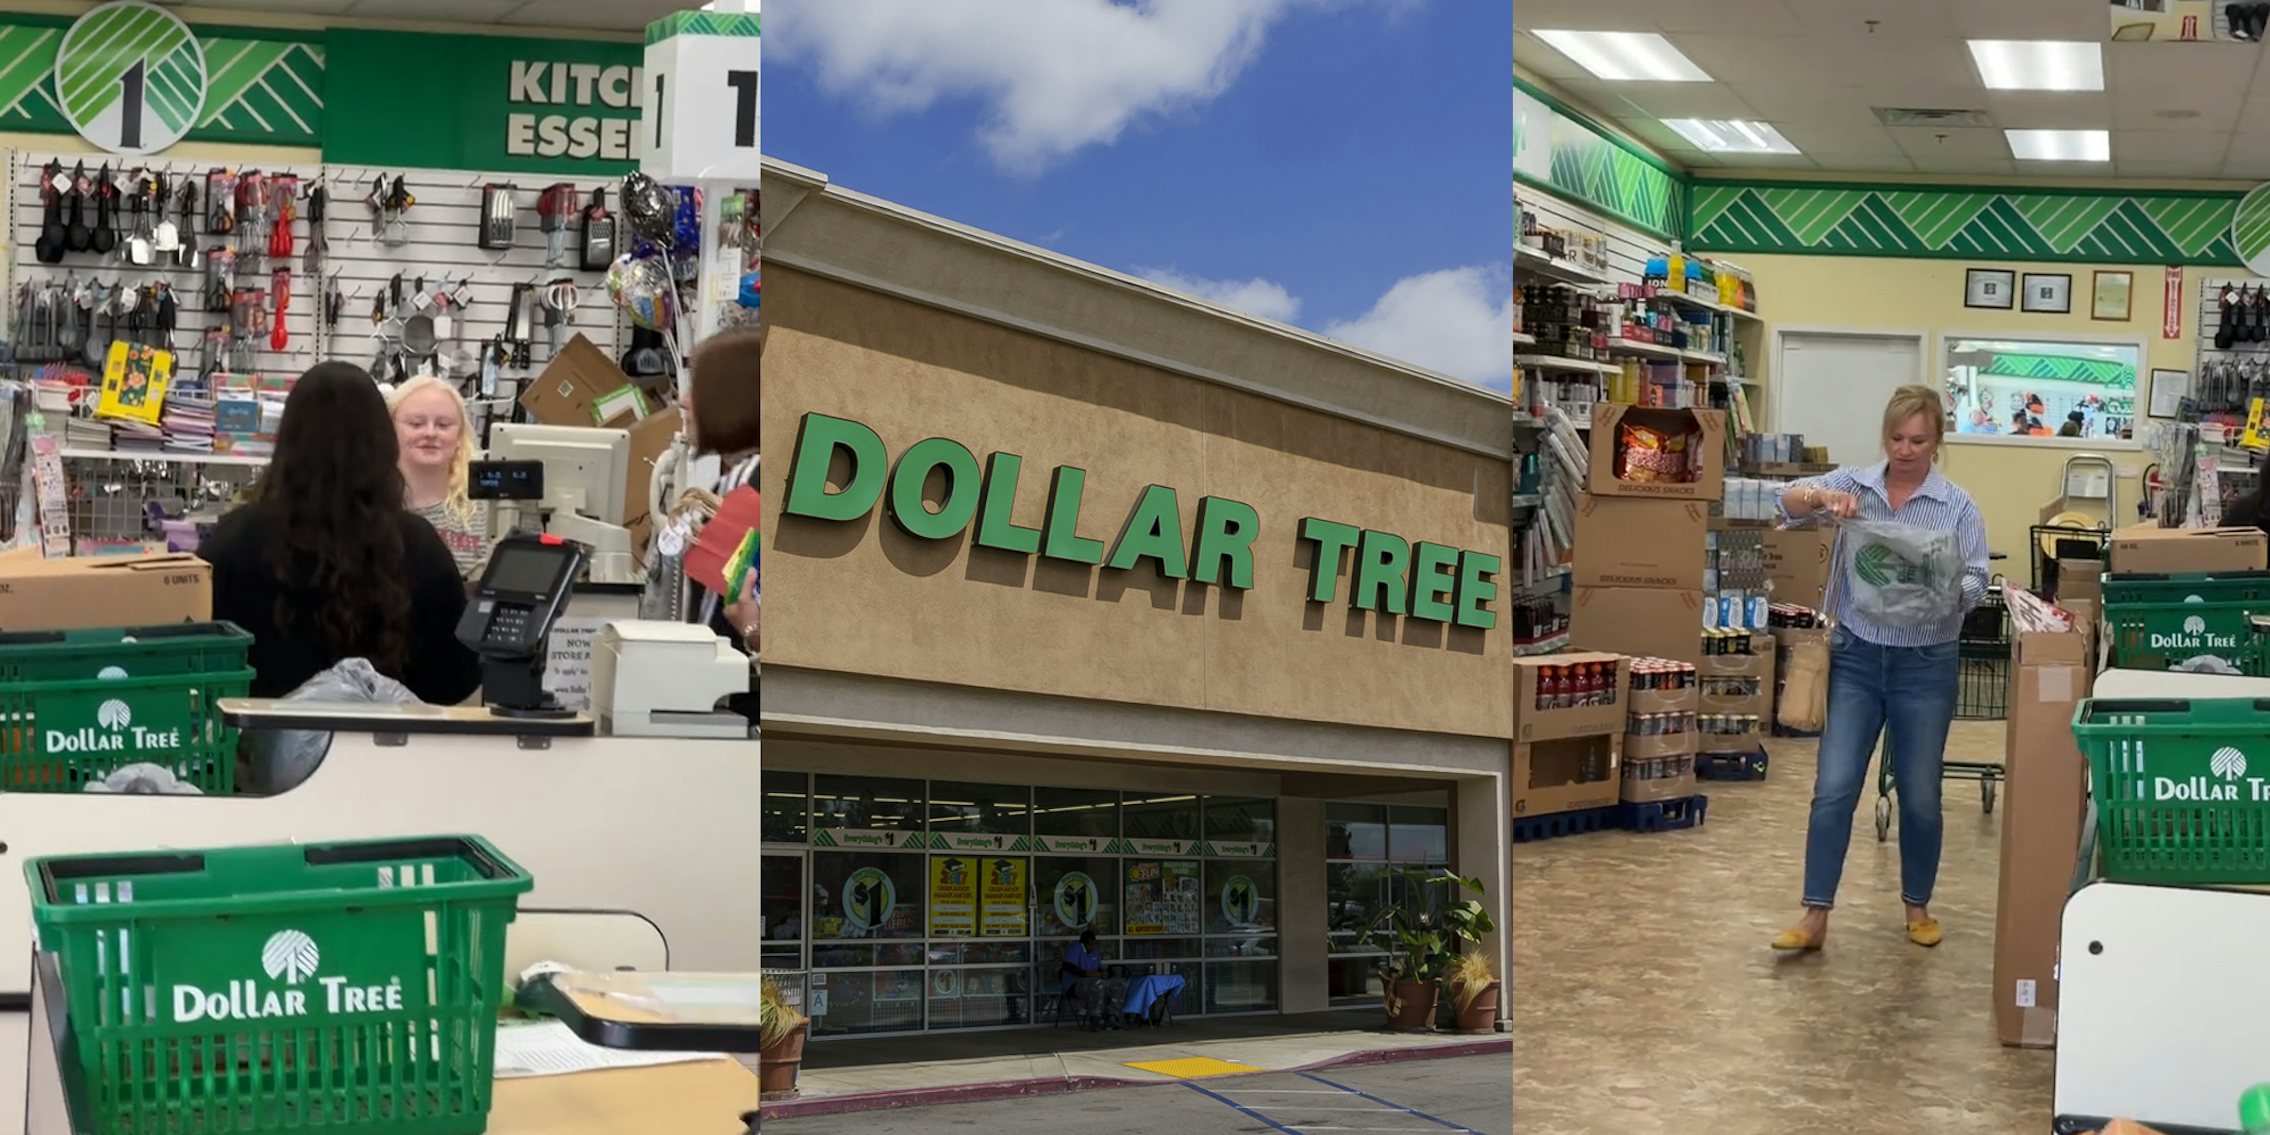 Dollar Tree customer checking out customers at register (l) Dollar Tree building with sign (c) Dollar Tree customer walking out of store with bag (r)